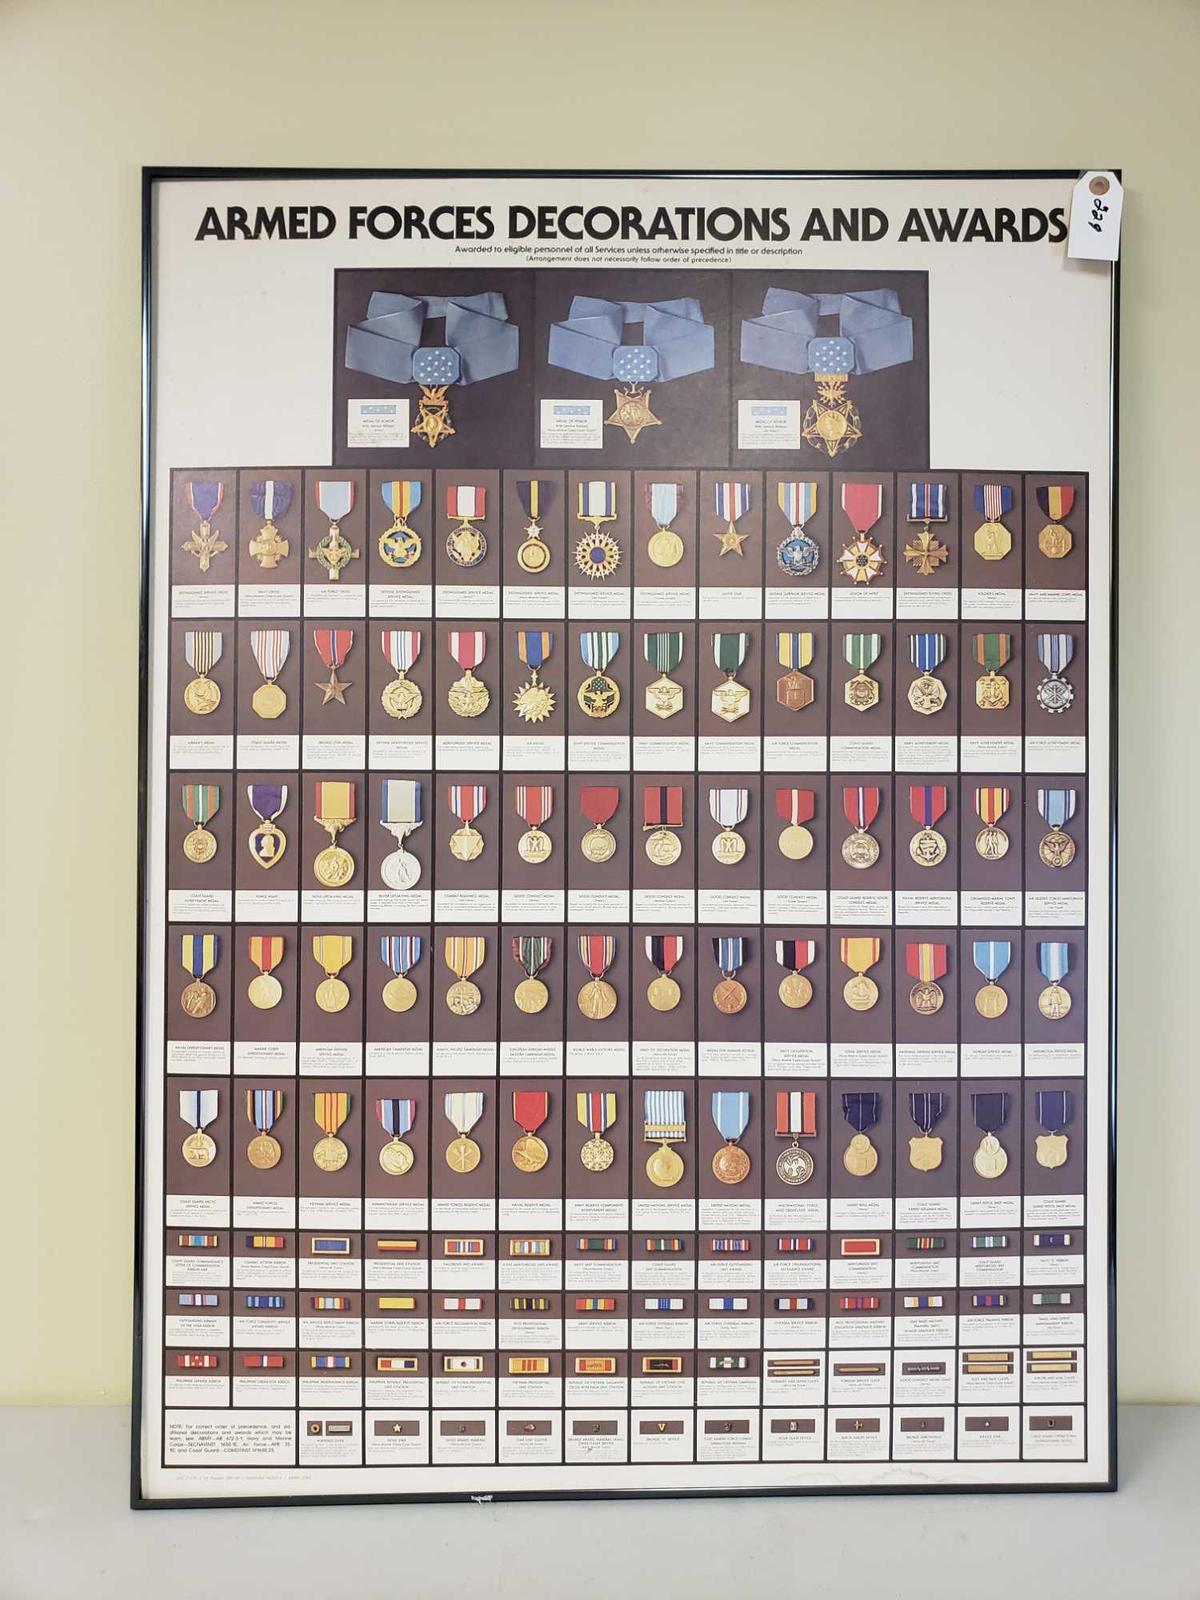 Decorations and Awards Poster